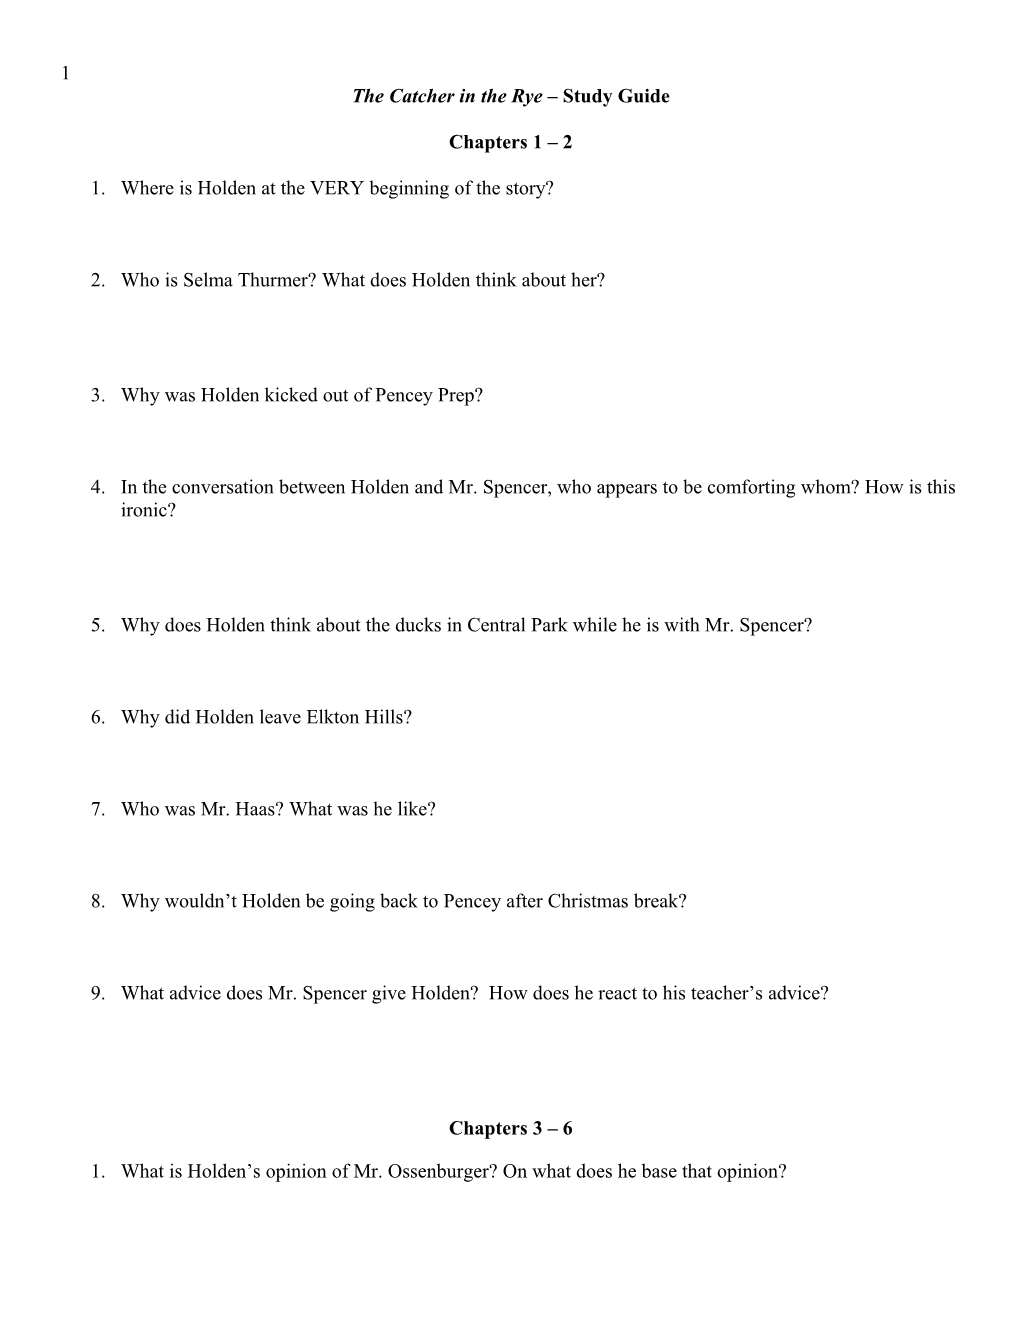 The Catcher in the Rye Study Guide